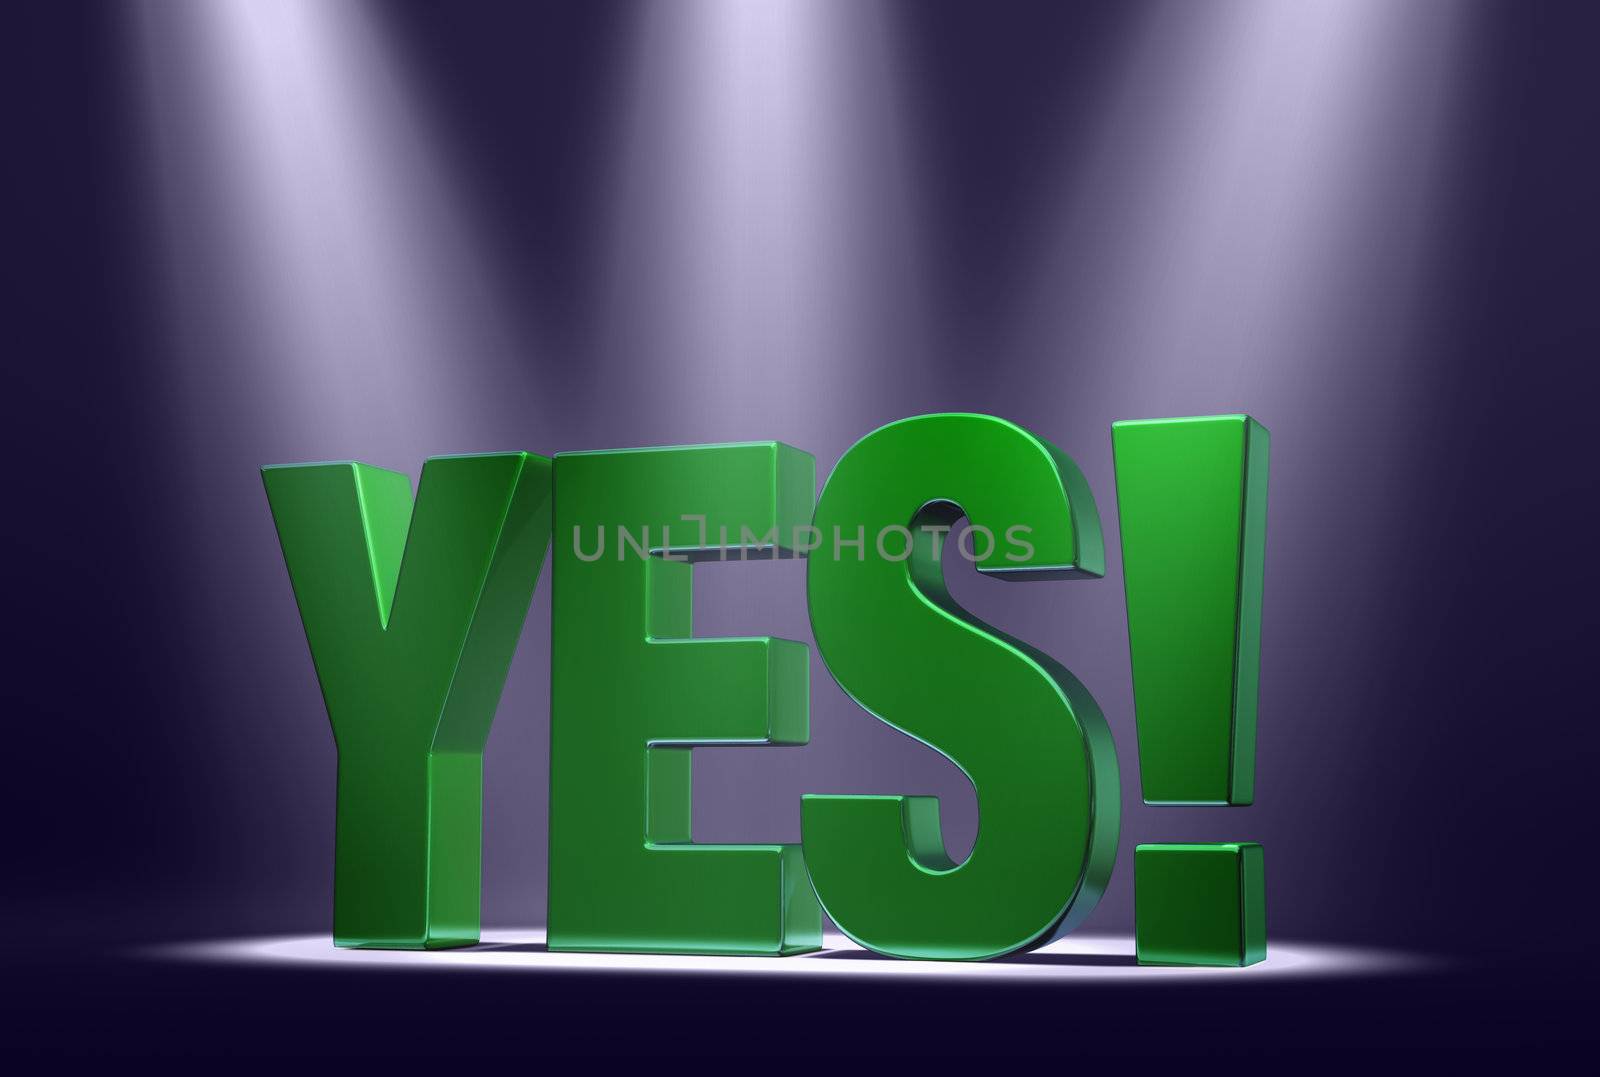 Green word "YES!" on dark background highlighted by three bright, blue-tinted spotlights.